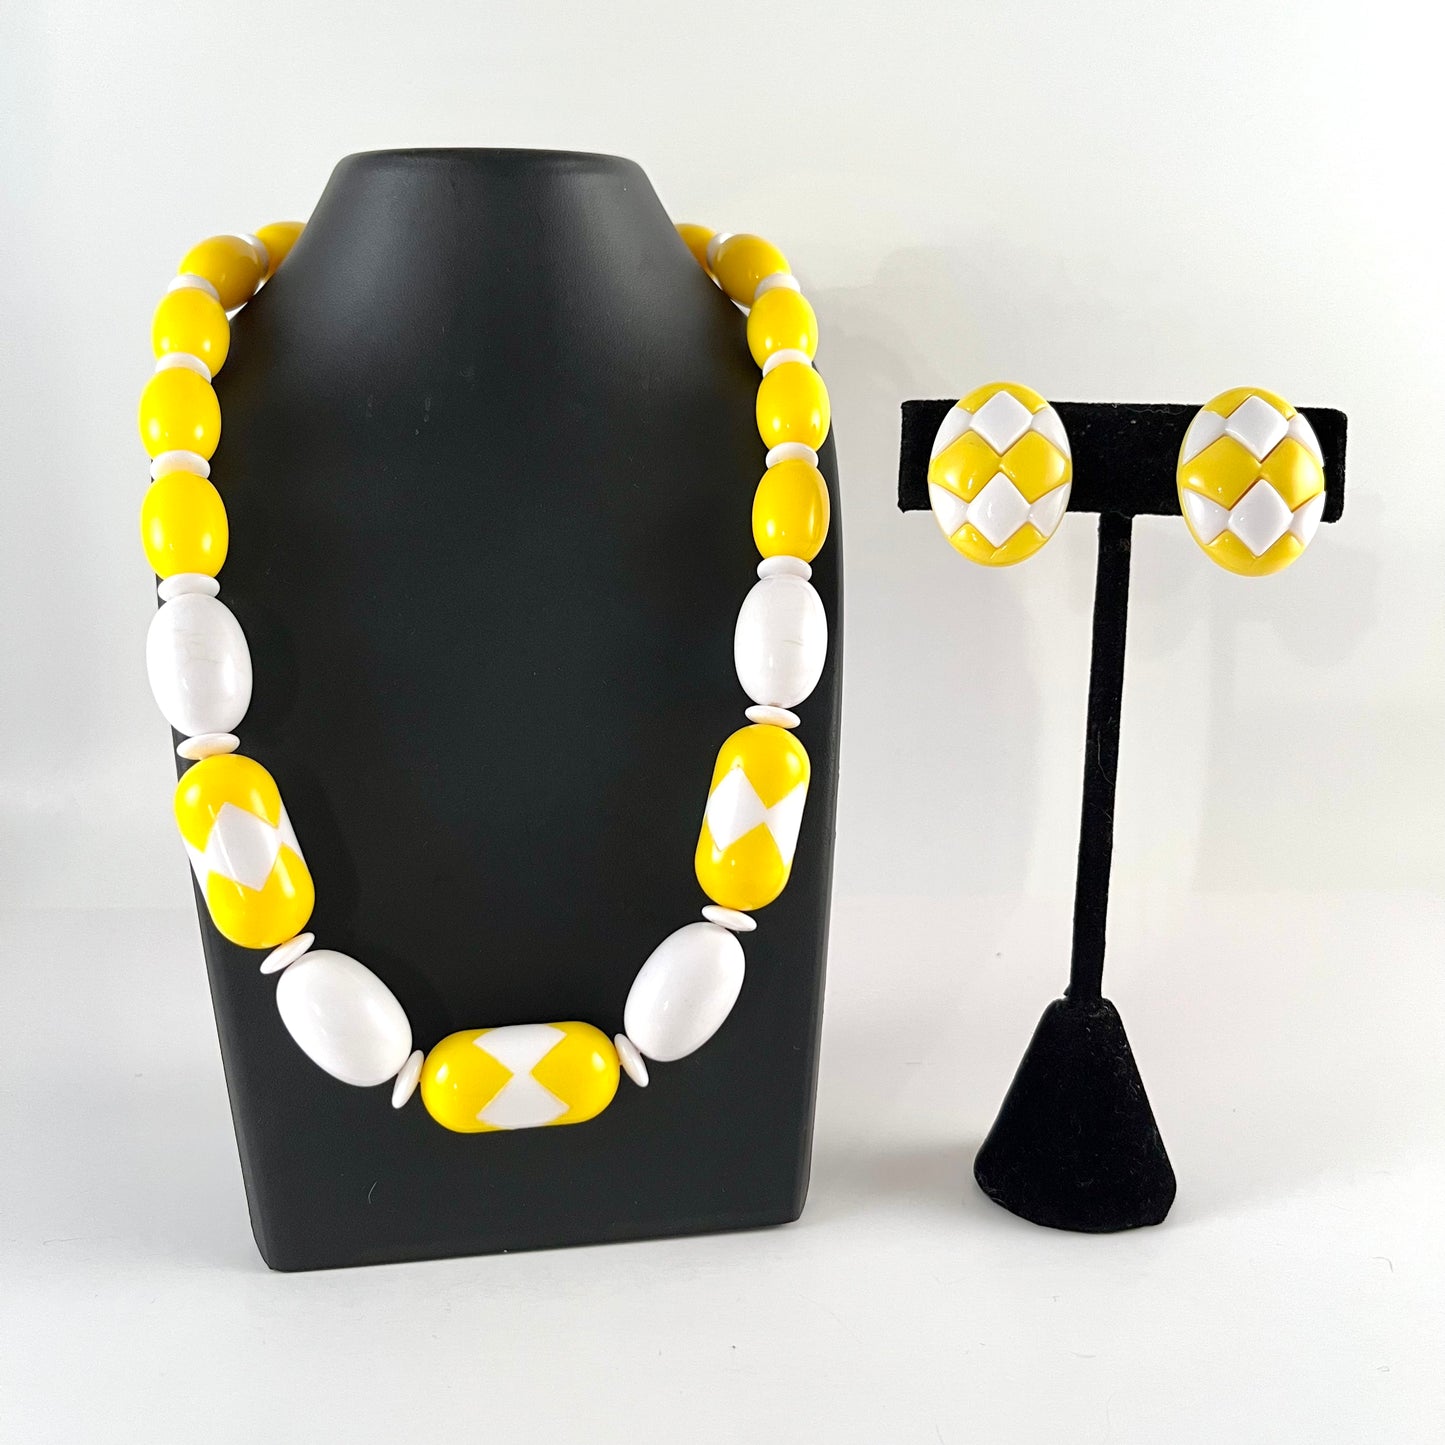 1987 Avon Sunsations Necklace & Earring Set in Spectator Yellow